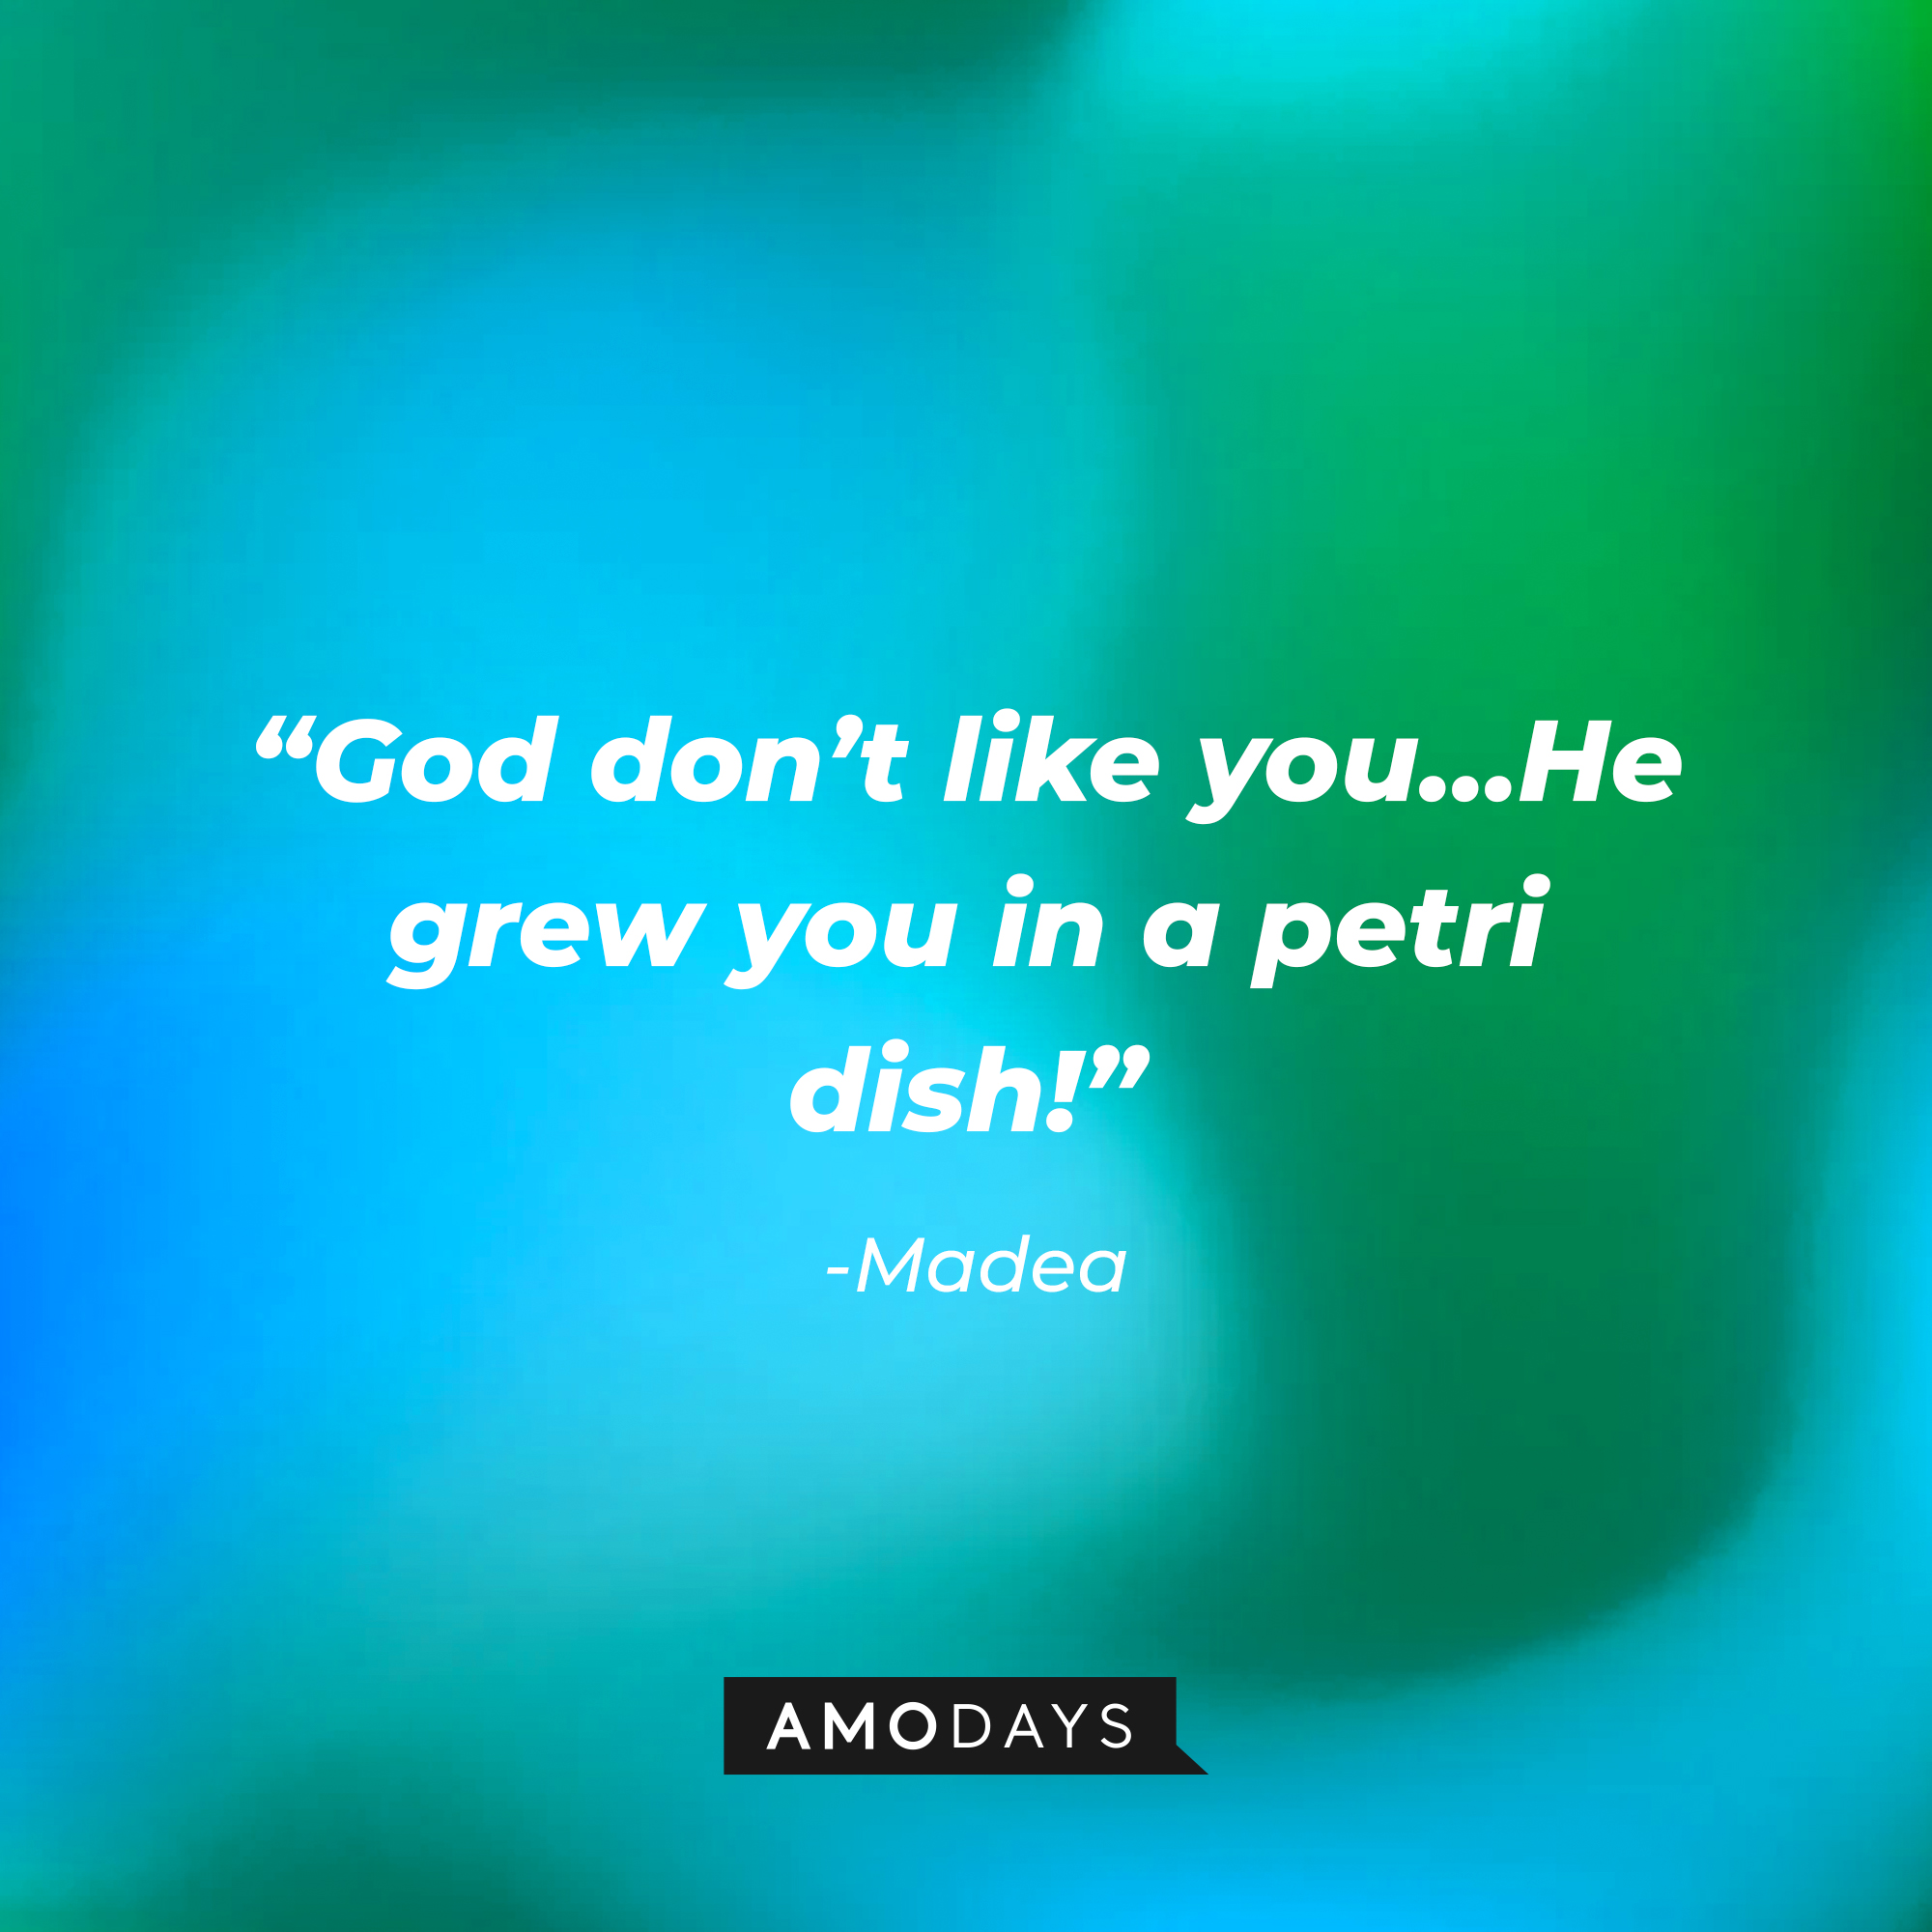 Madea’s quote: “God don’t like you…He grew you in a petri dish!” | Source: AmoDays